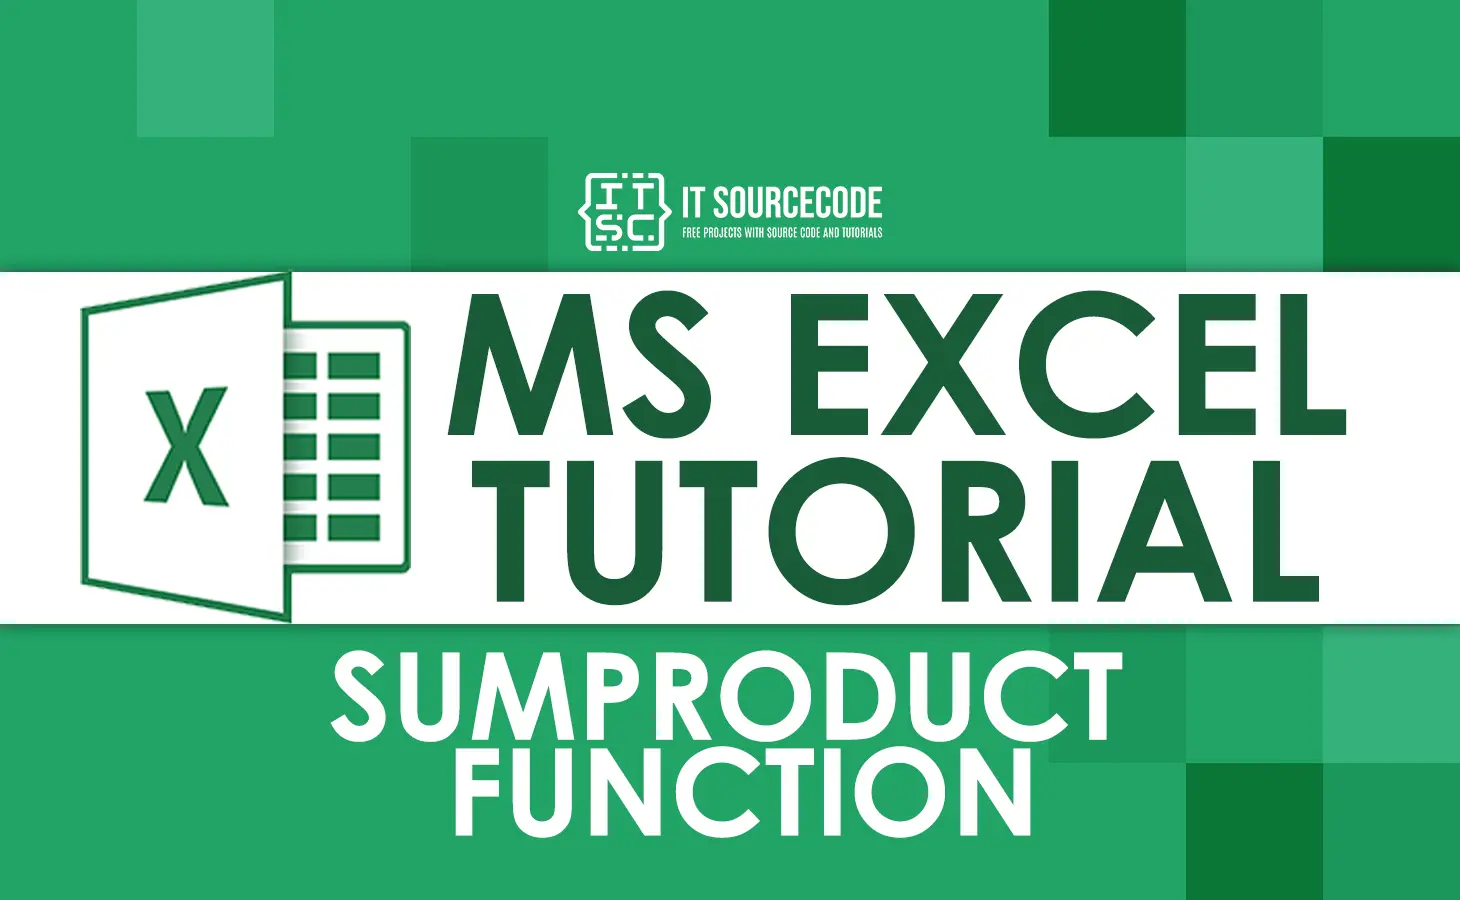 SUMPRODUCT FUNCTION IN EXCEL